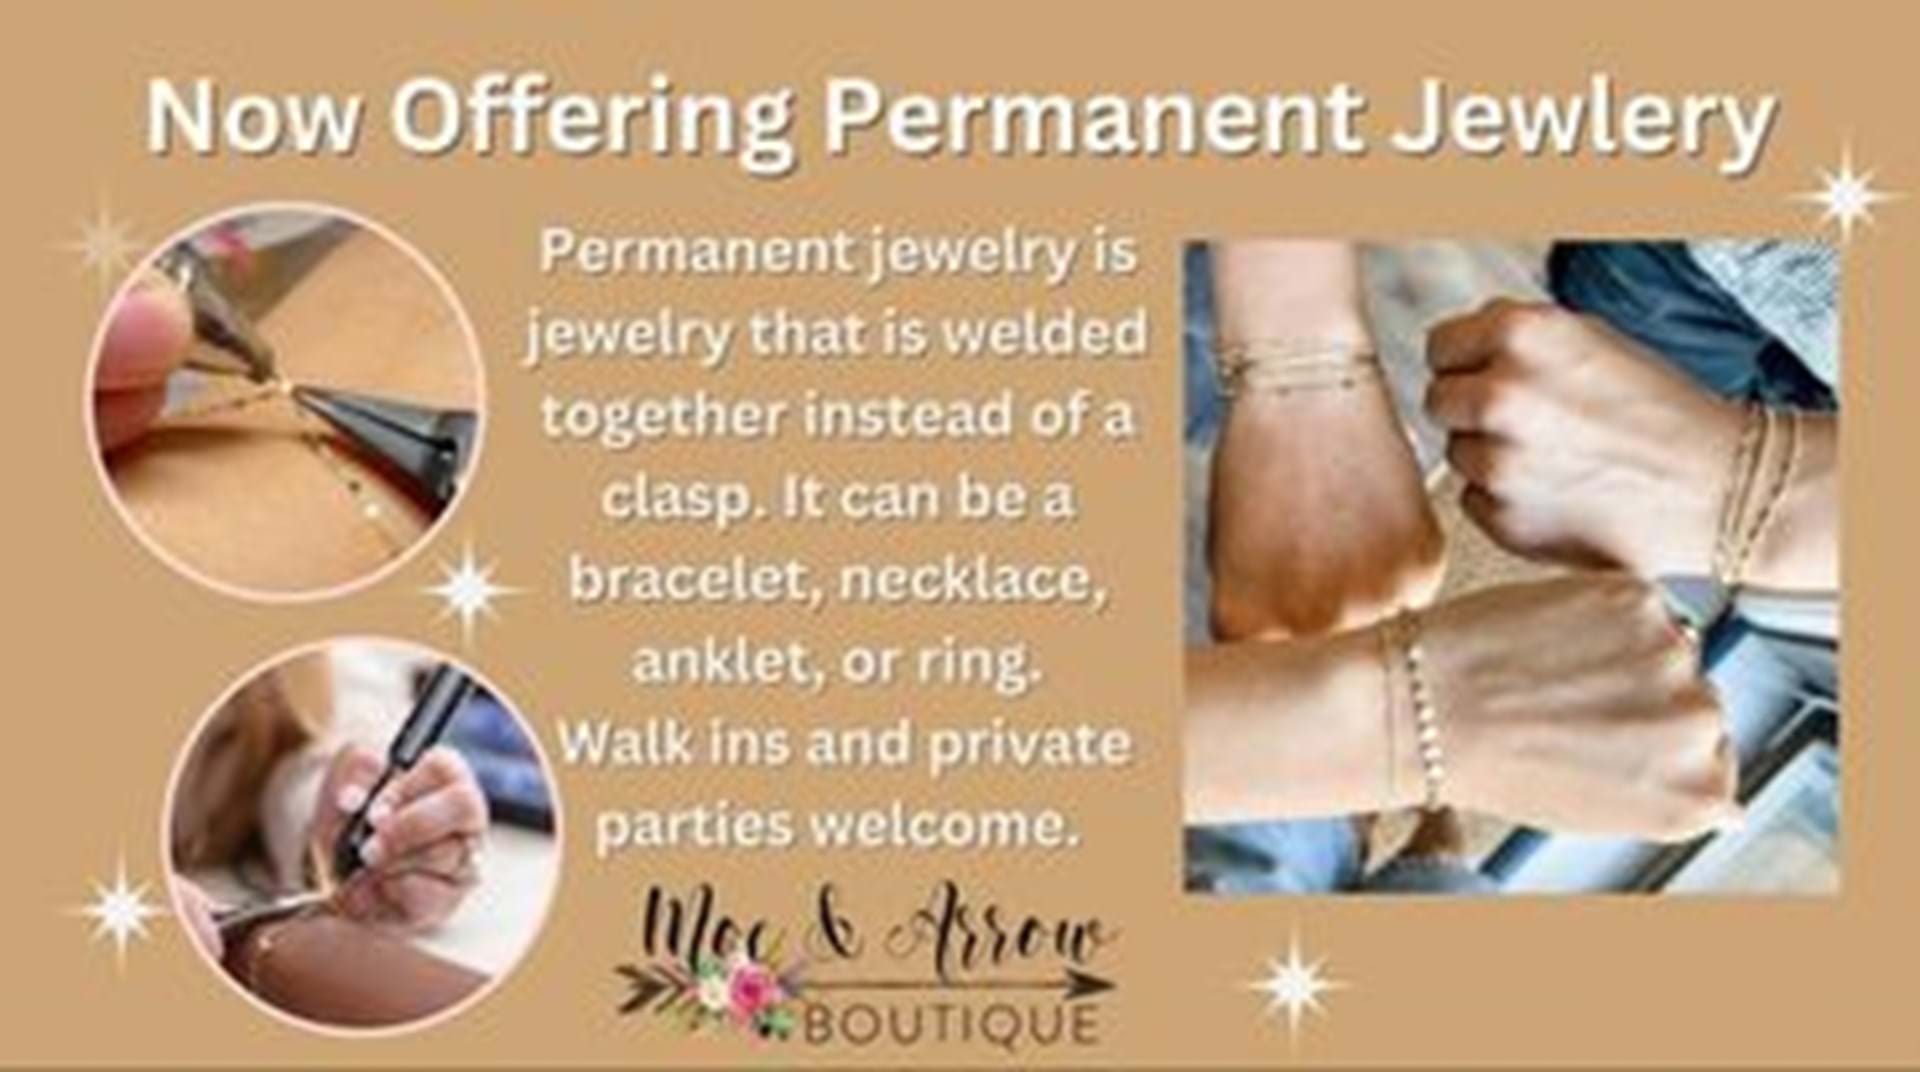 We offer permanent jewelry